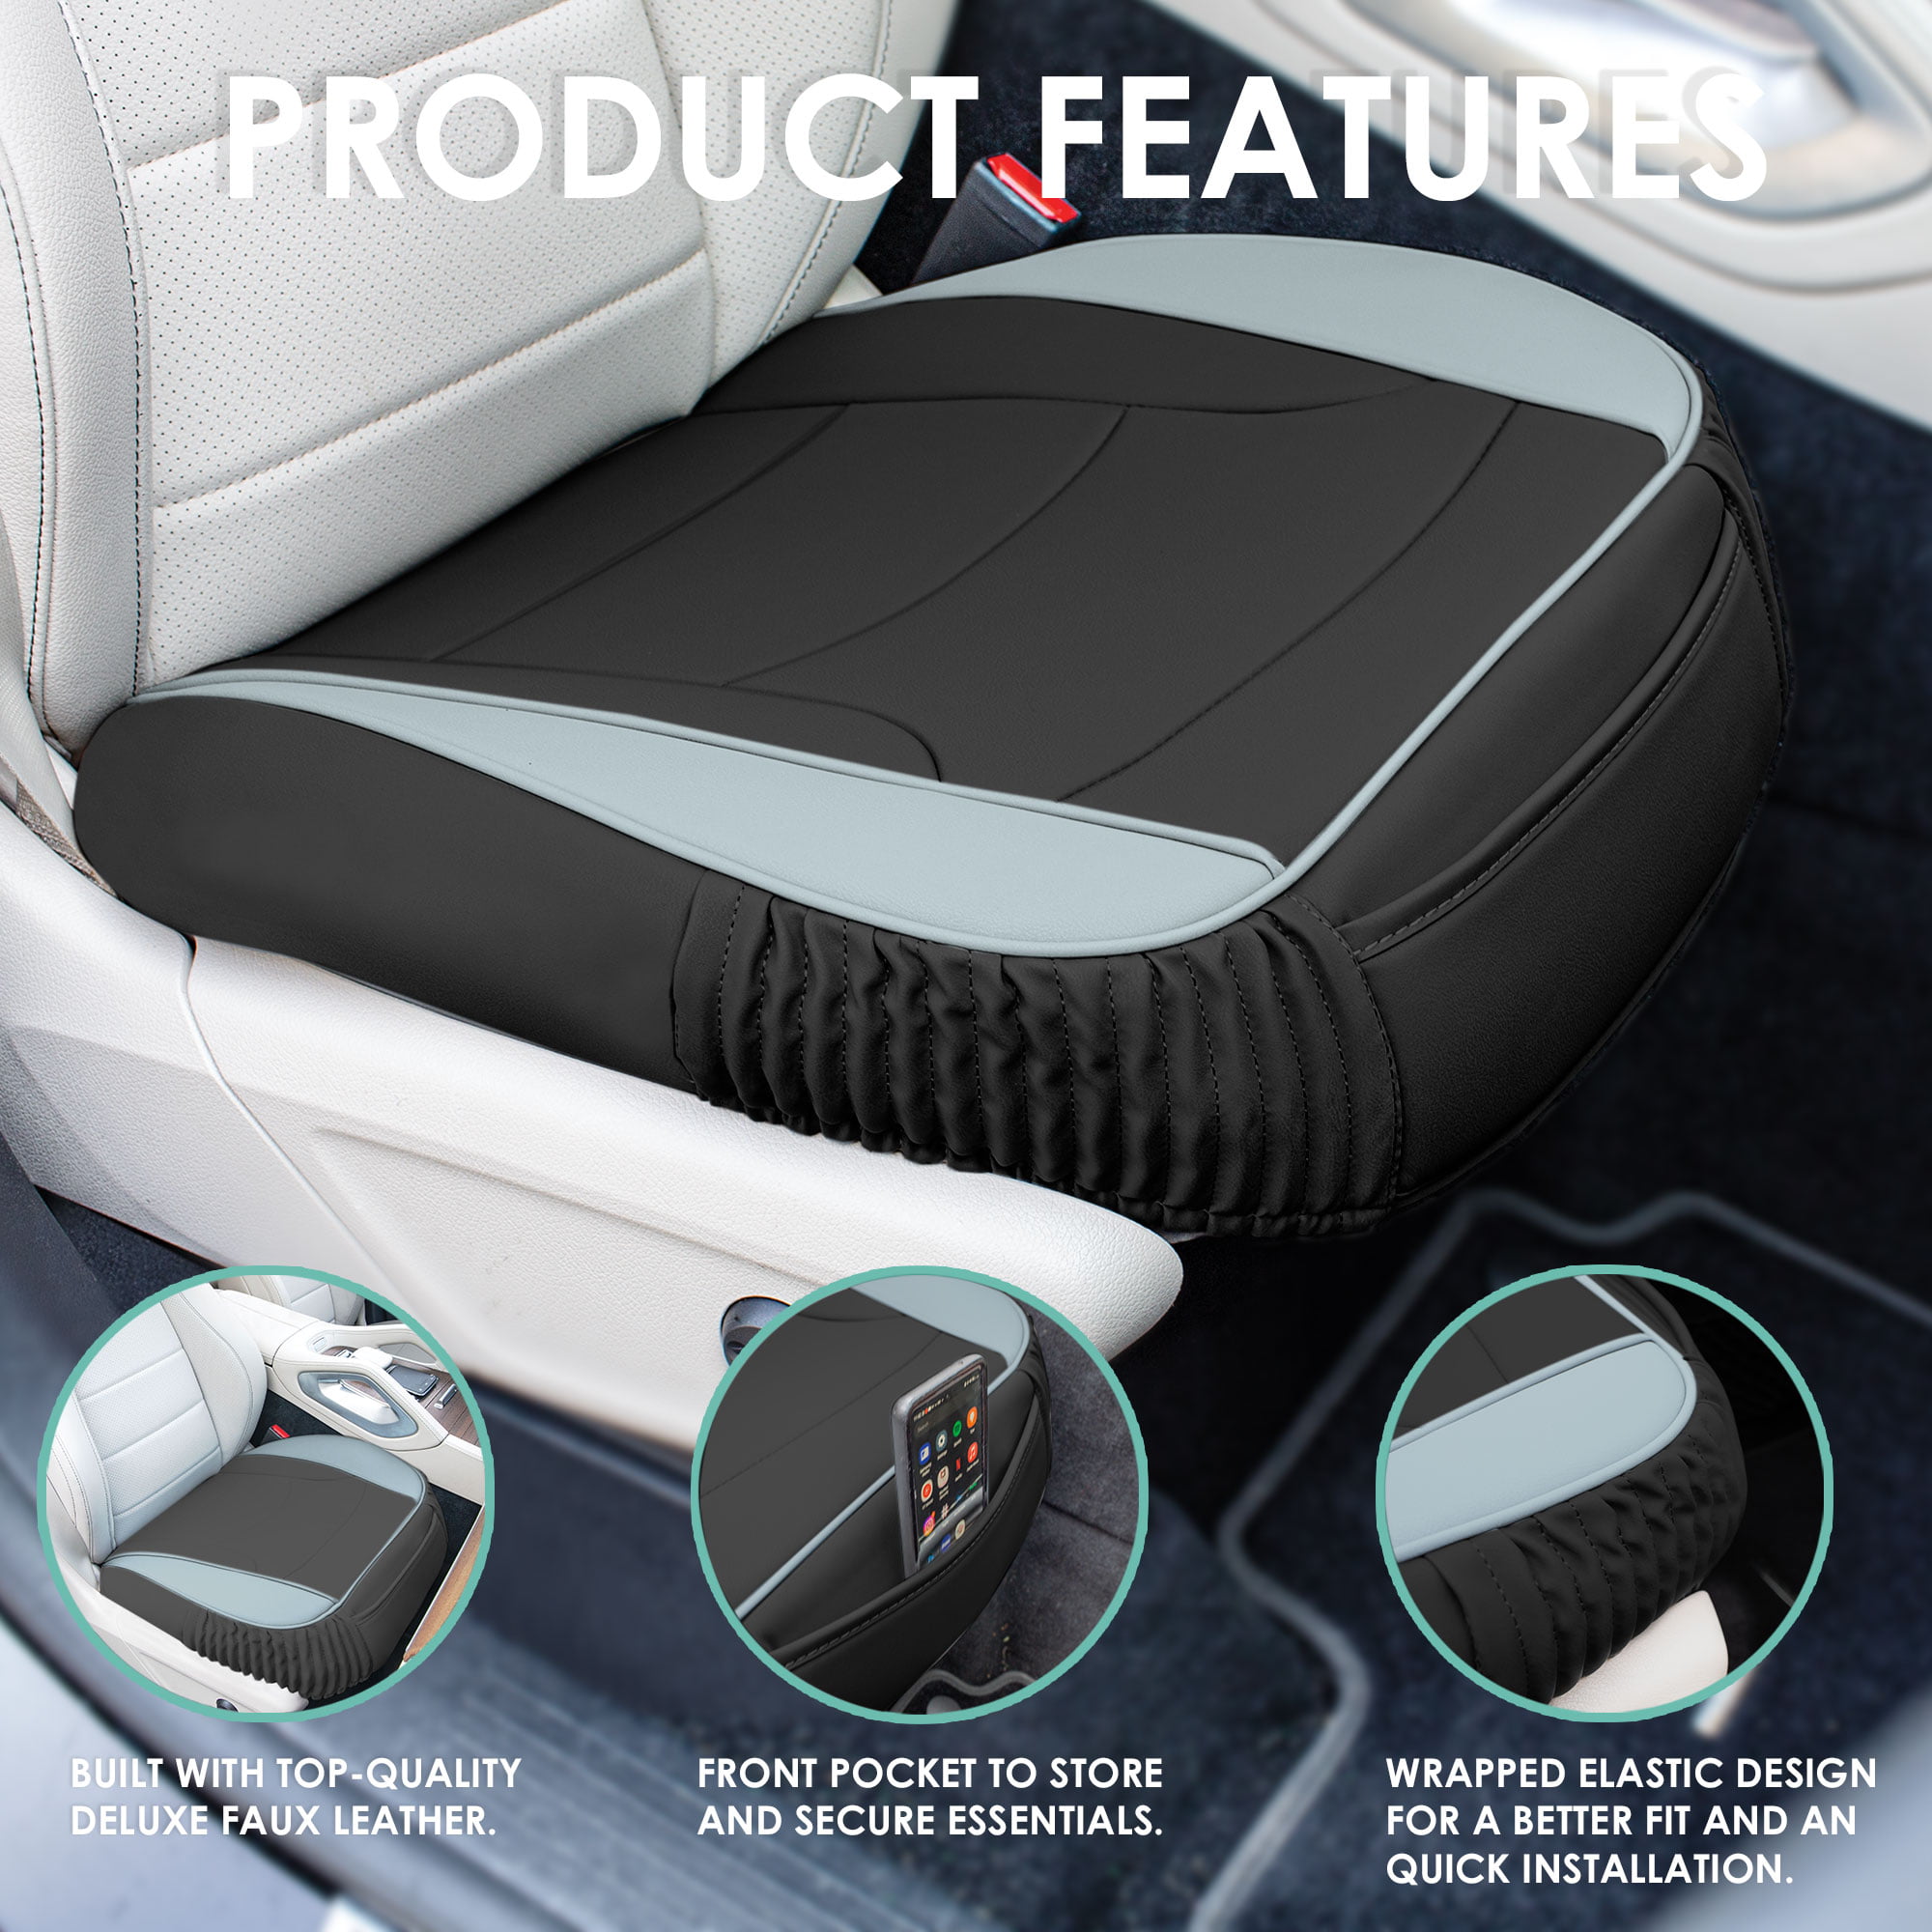 FH Group Car Seat Cushion – Durable Beige Tan PU Leather Car Seat Cushions,  2 Piece Front Set Car Seat Cushion, Bottom Seat Protector, Water Resistant